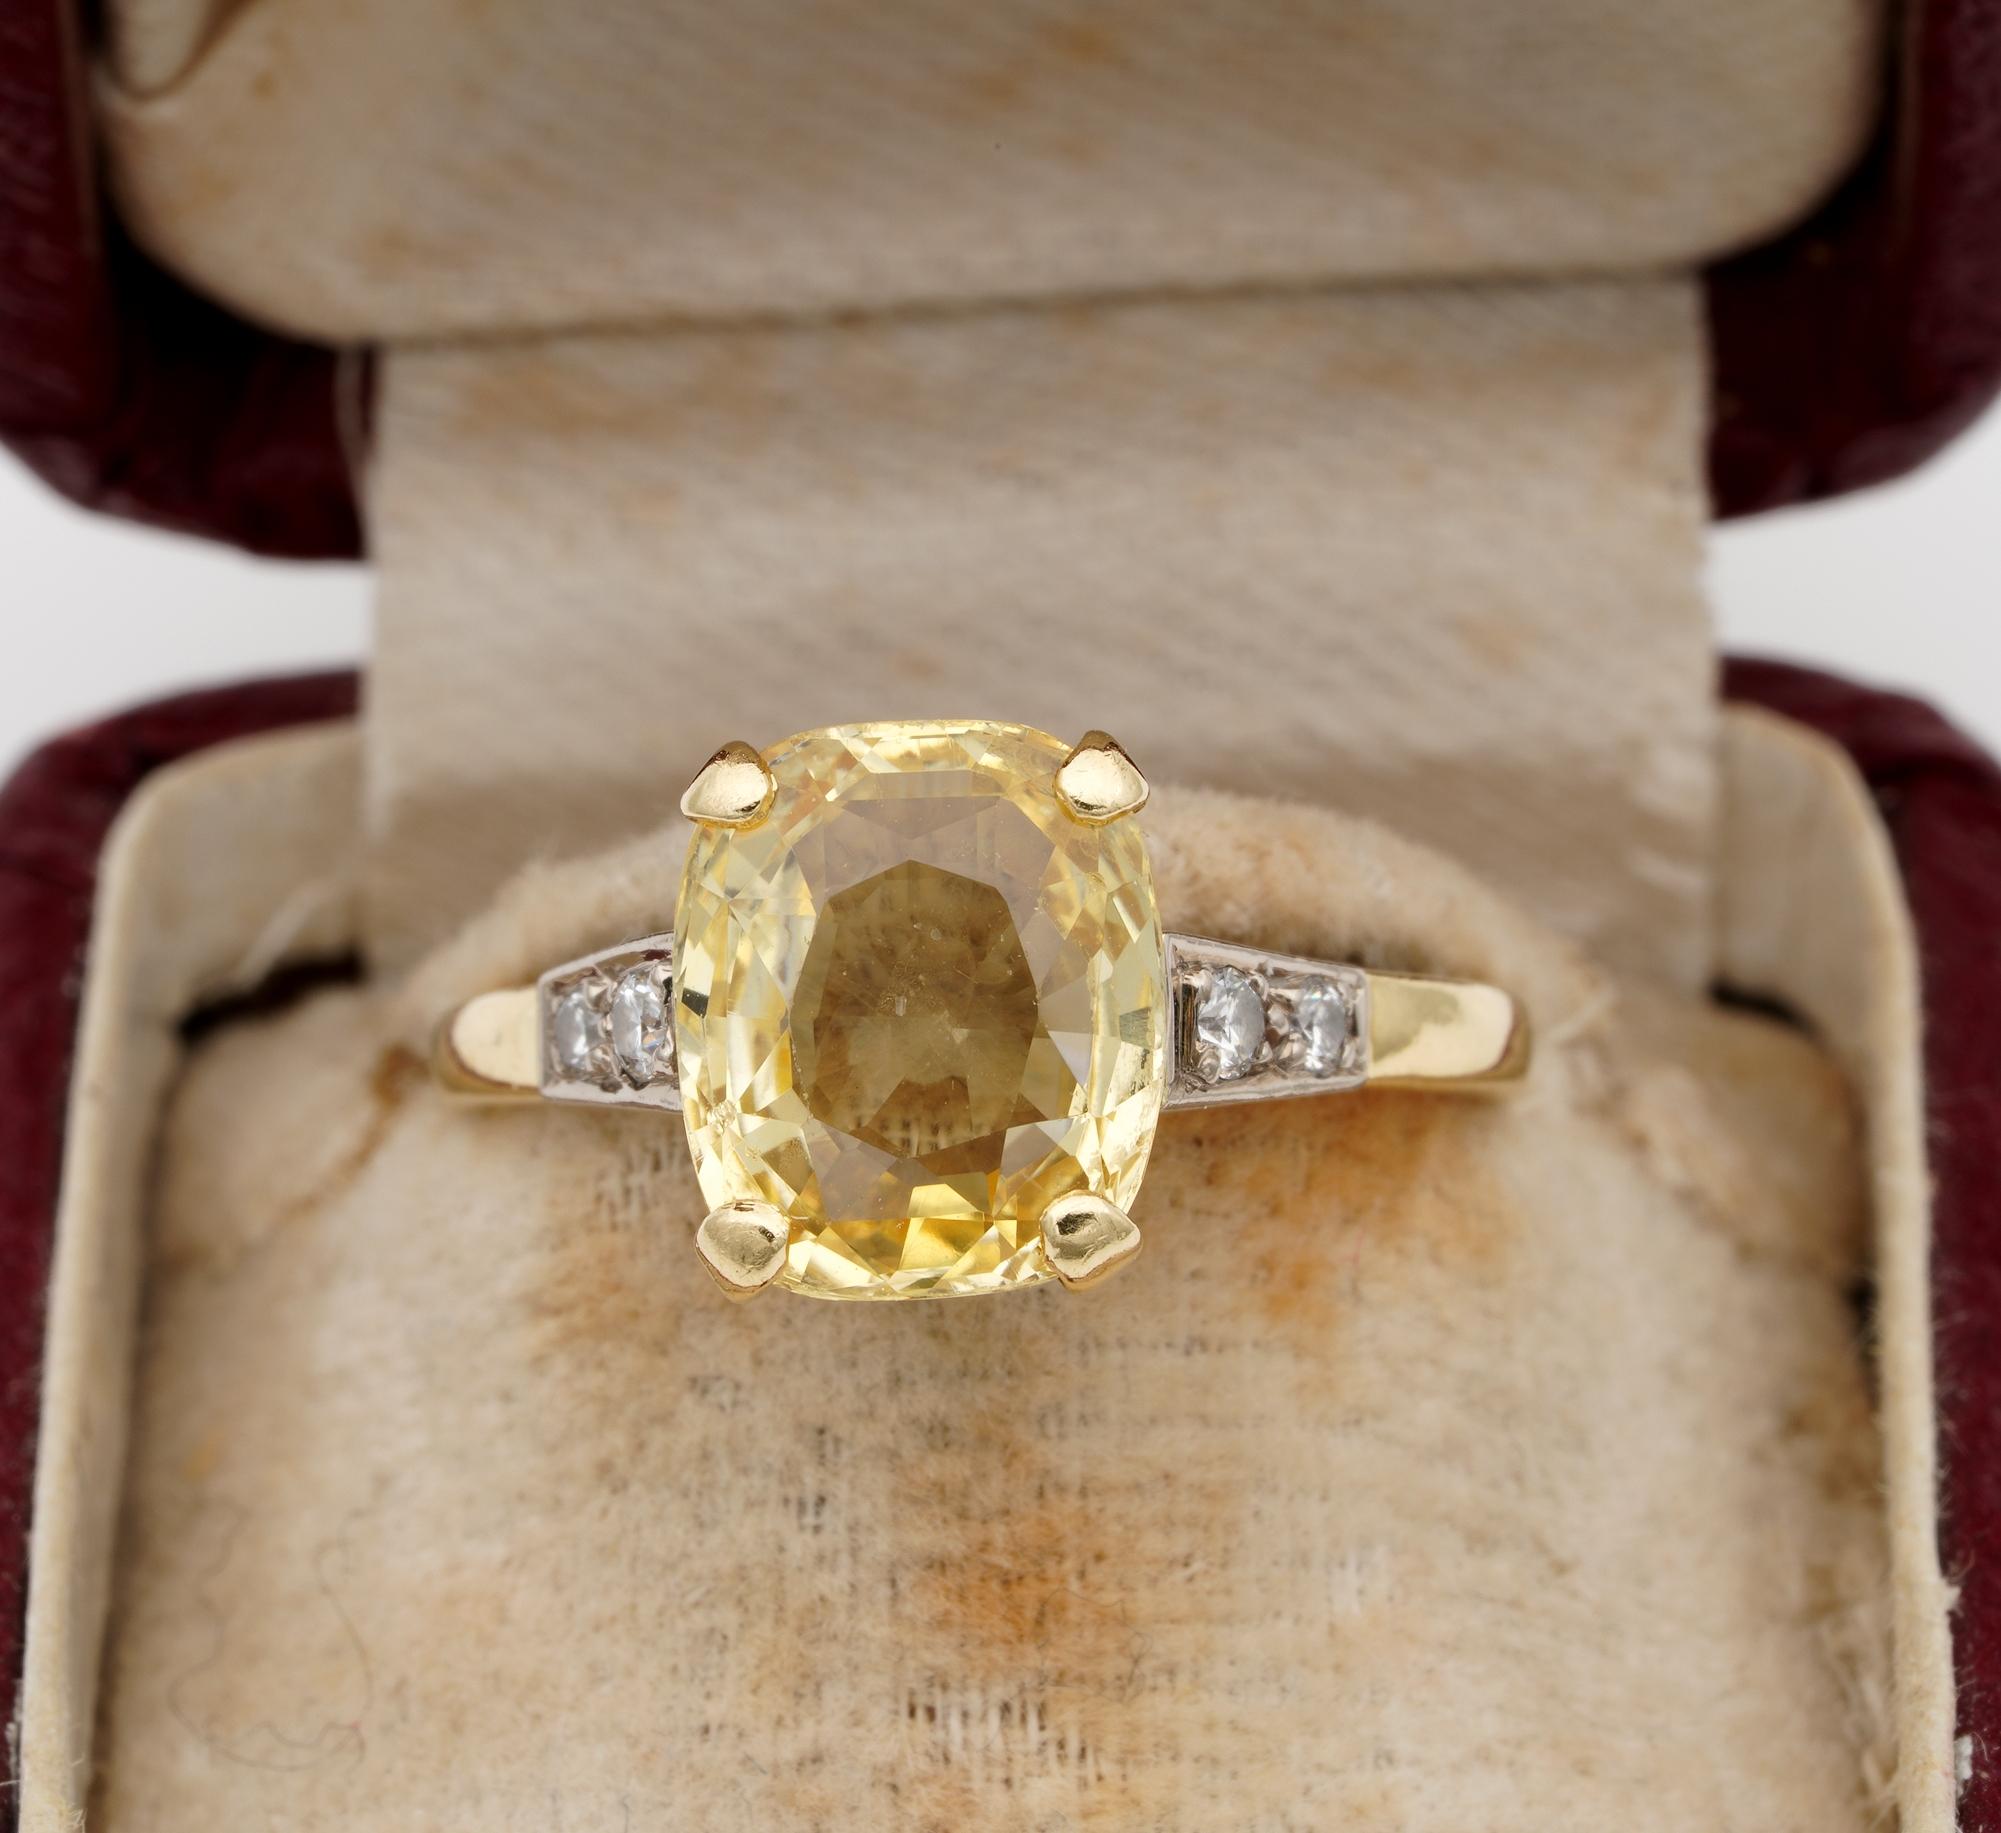 The Rarity Corner

This beautiful late Art Deco ring has an appealing sturdy solitaire design
Hand crafted of solid 18 KT gold with little Platinum portions on the little Diamonds settings – dating approx 1930 ca
Beautiful everlasting style to hold